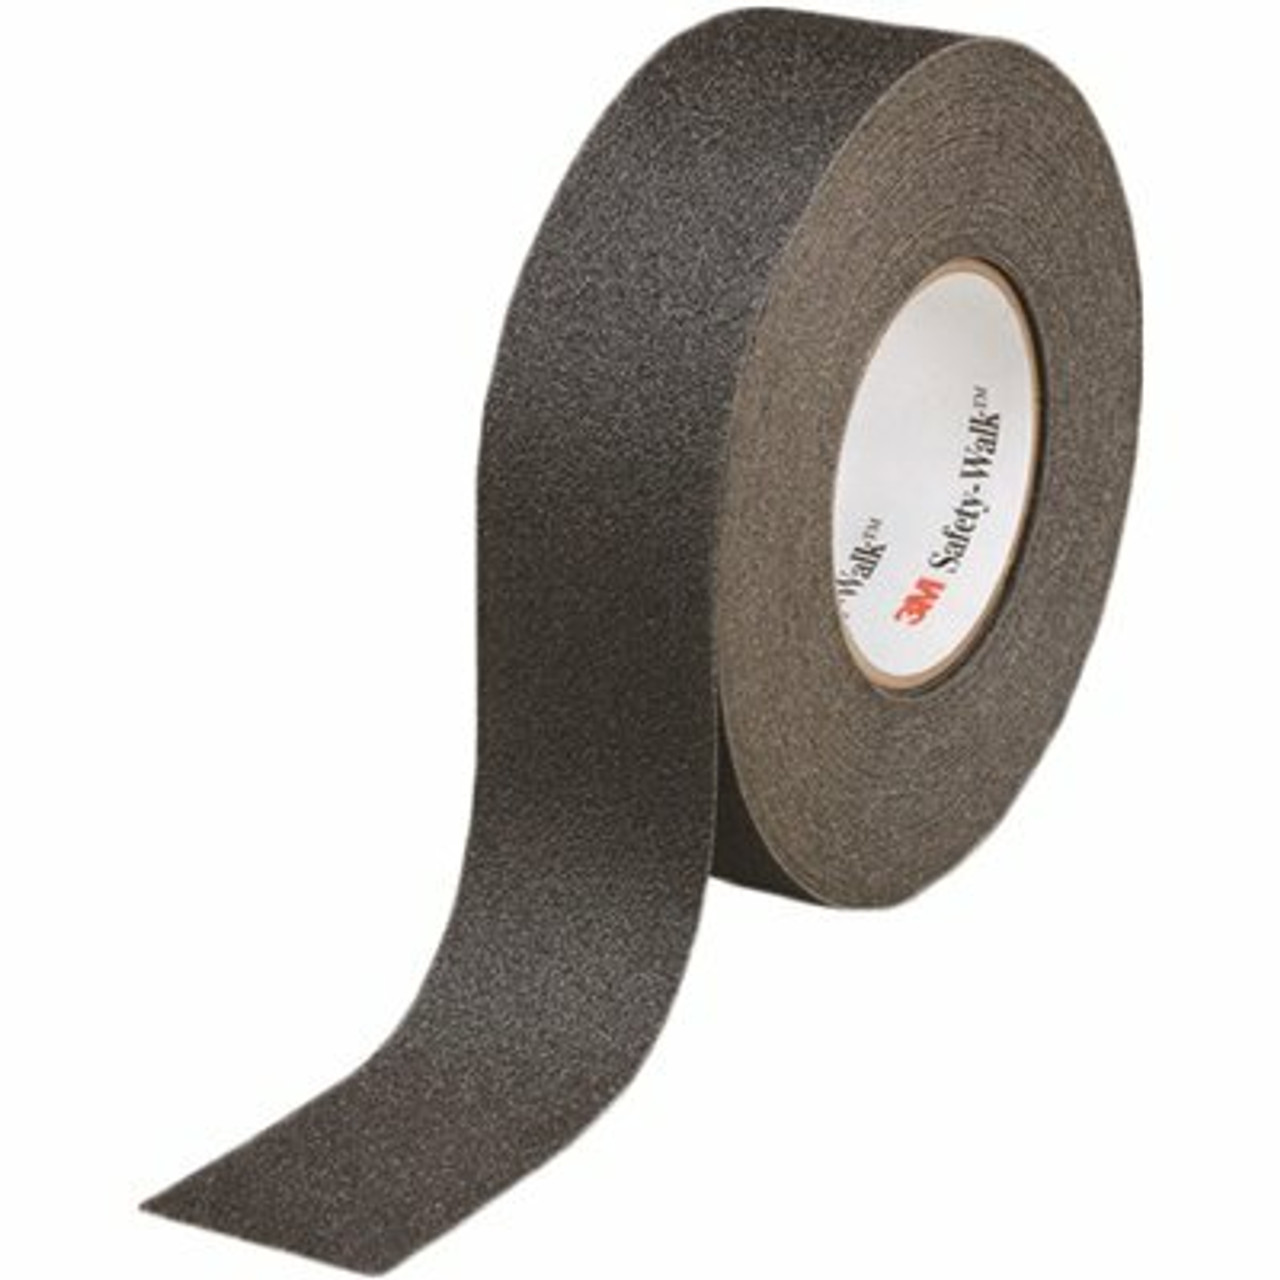 3M 2 In. X 20 Yd. Black Safety-Walk Slip-Resistant General Purpose Tapes And Treads 610